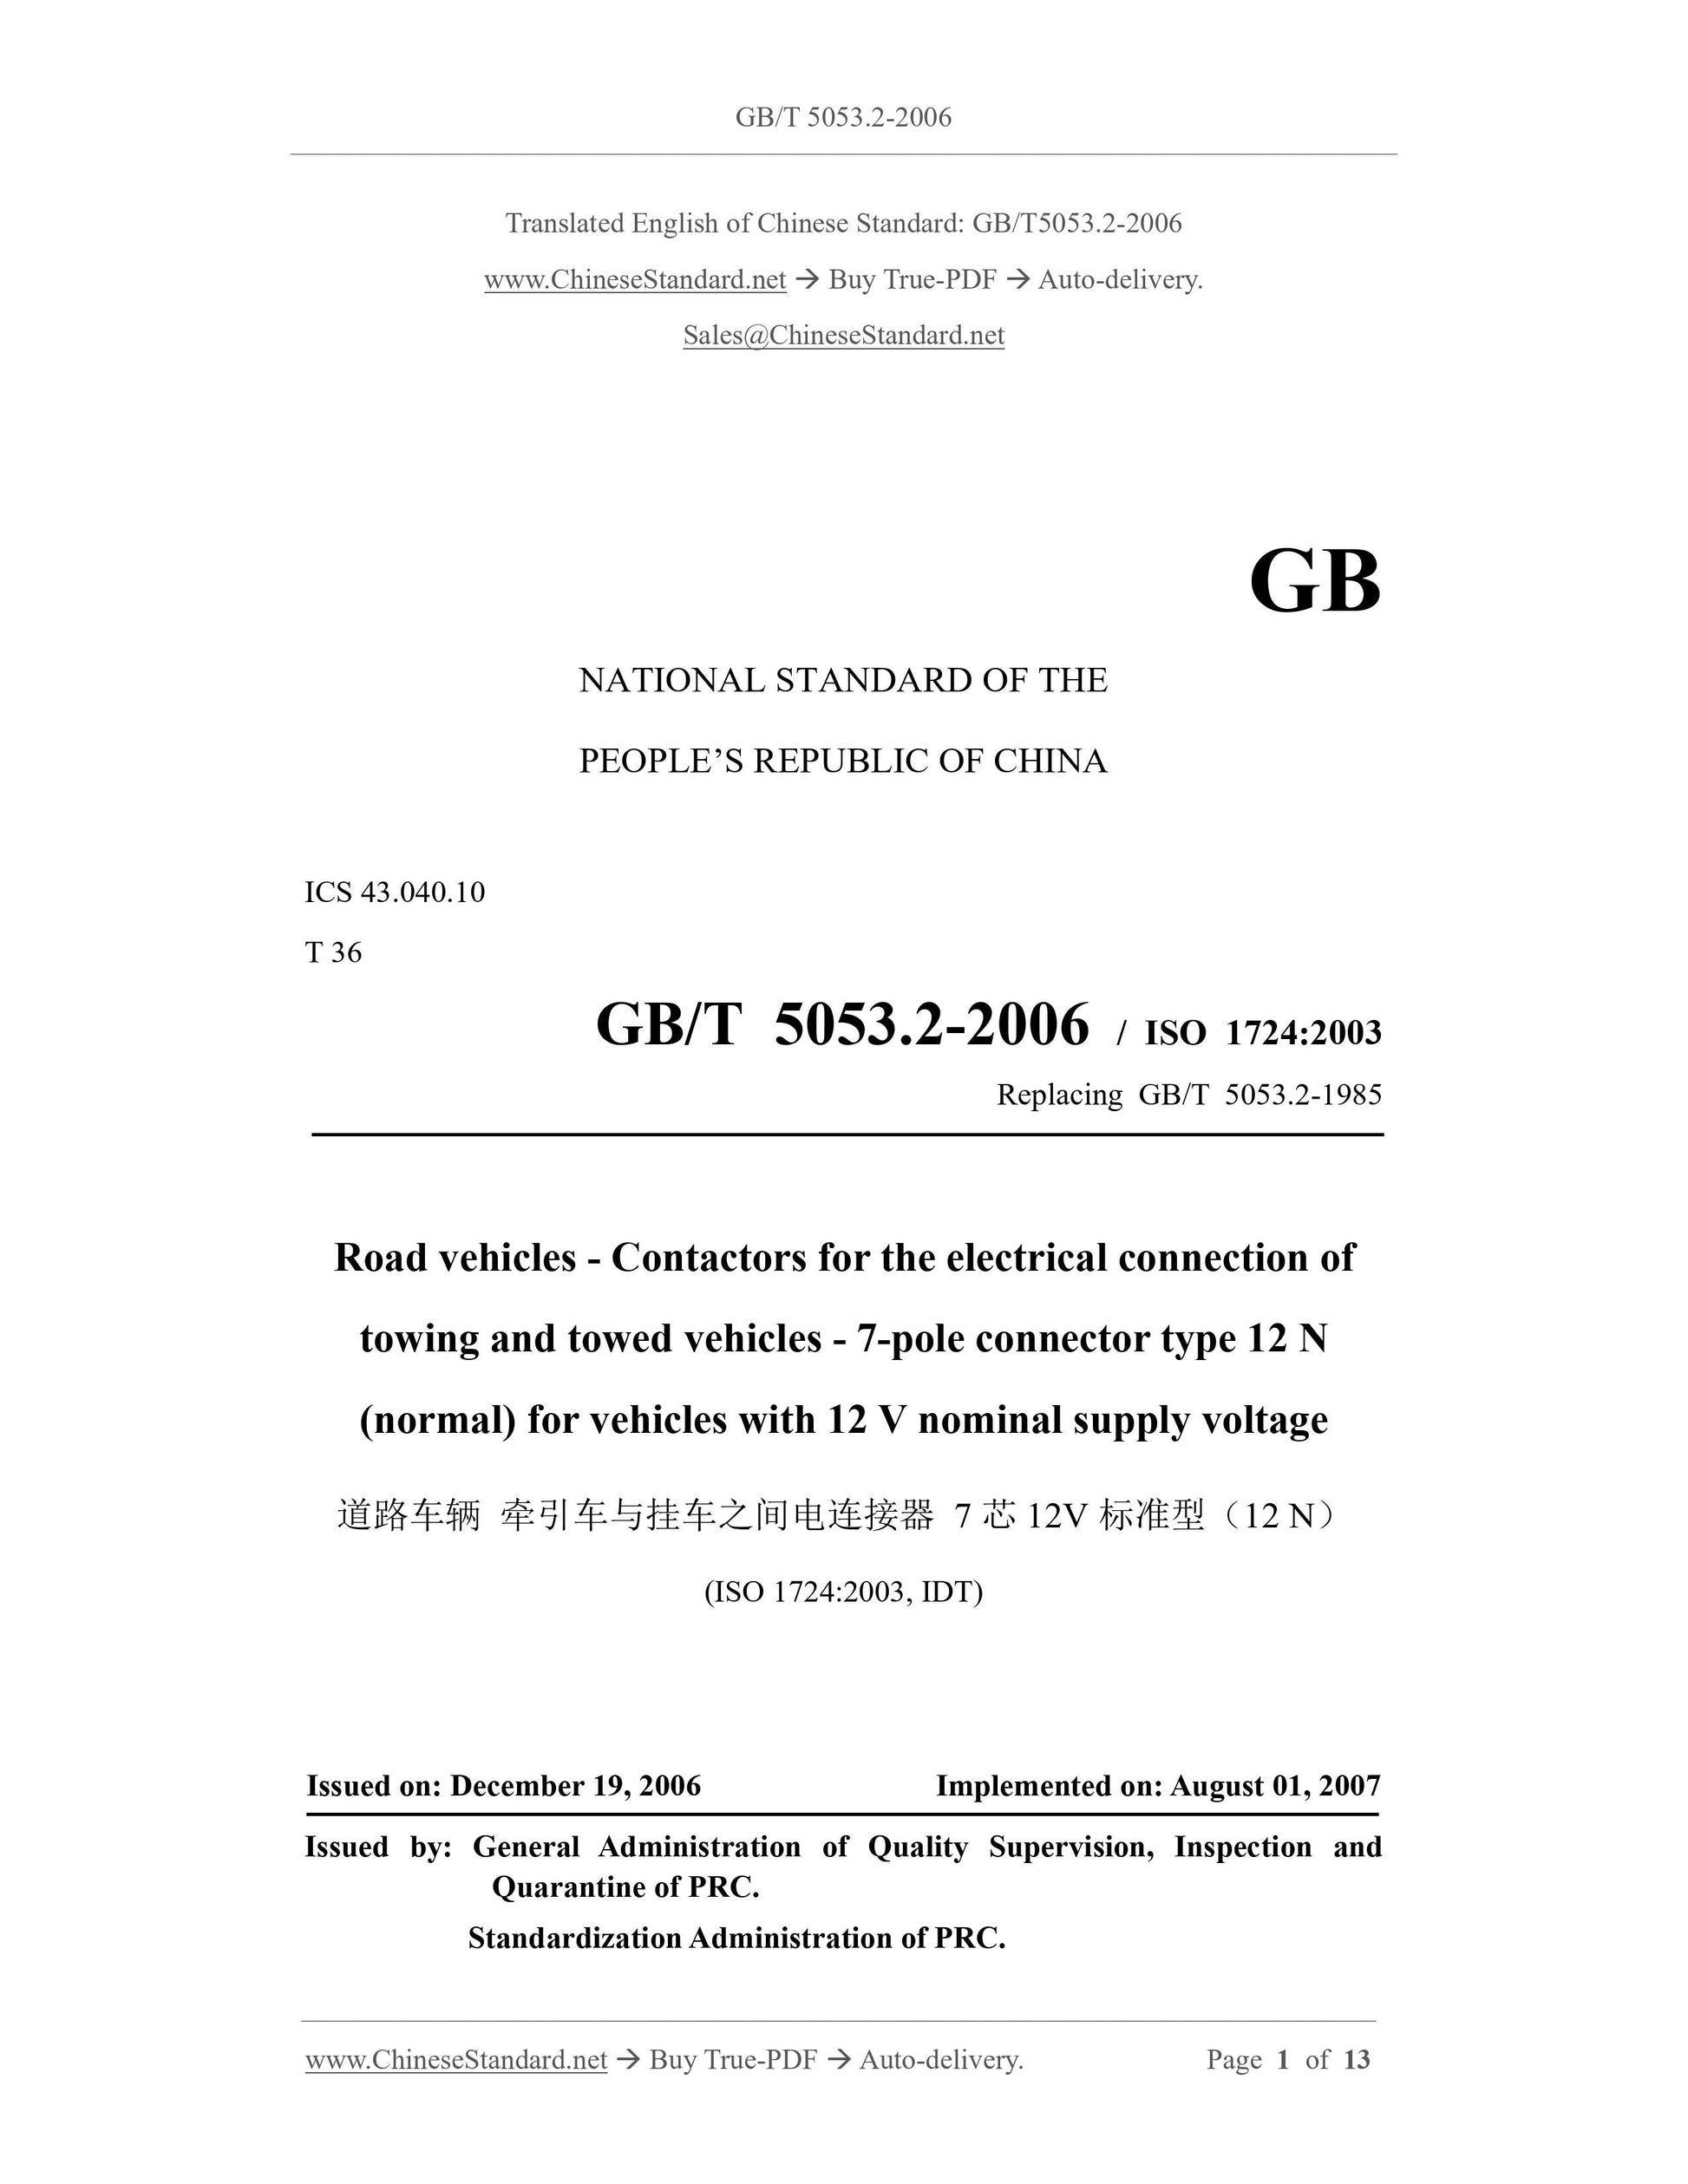 GB/T 5053.2-2006 Page 1